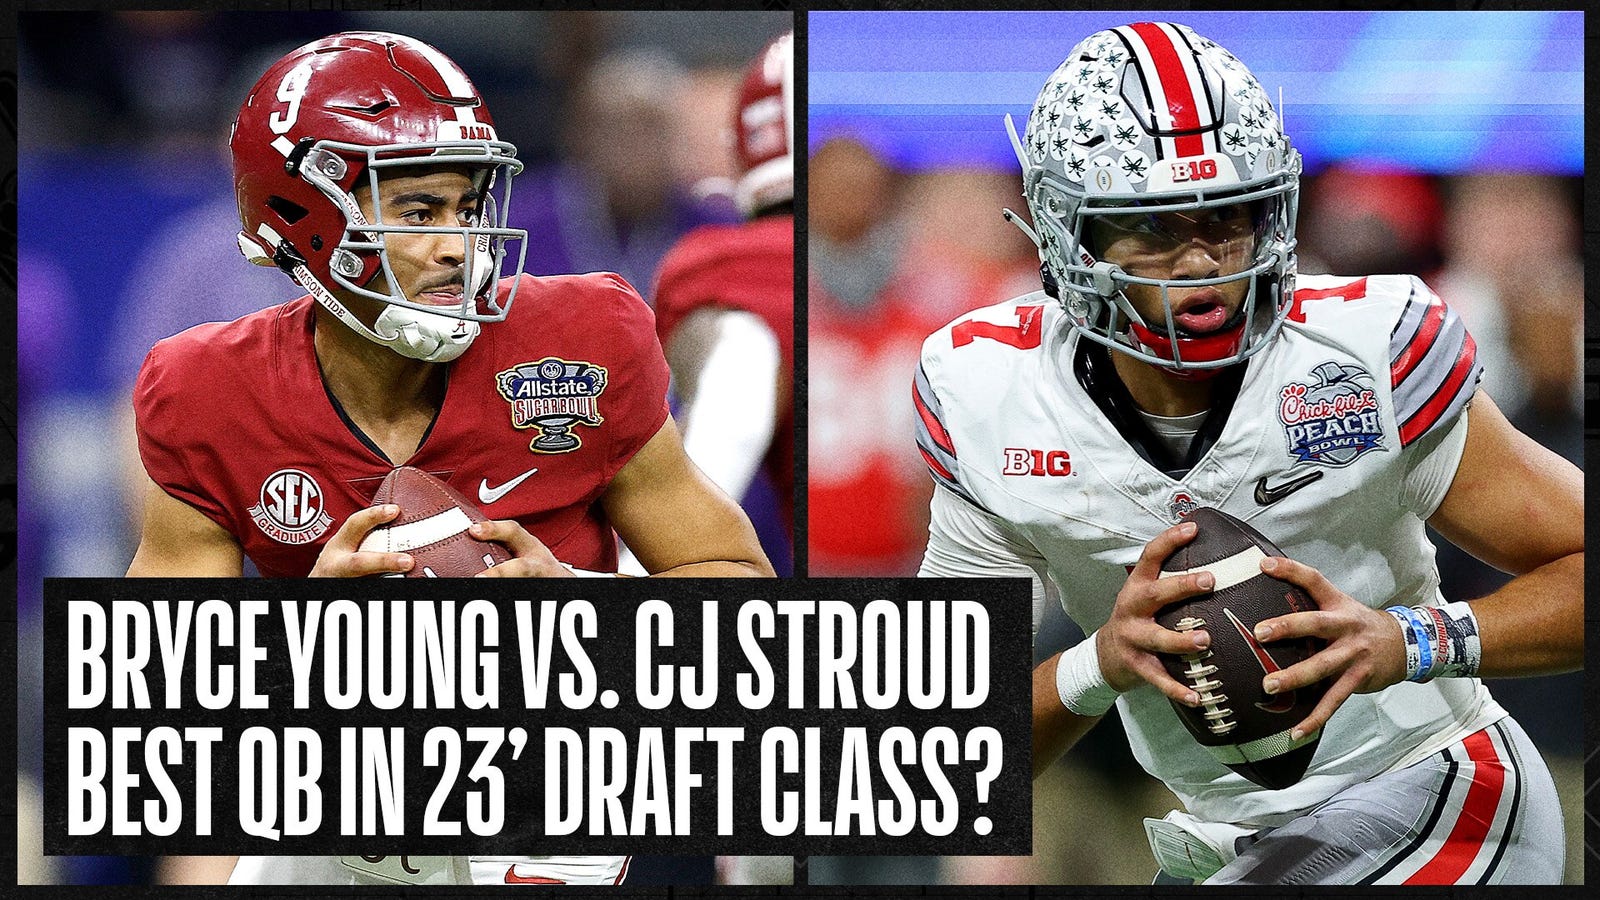 Bryce Young vs CJ Stroud: Who is the best QB in the NFL Draft?